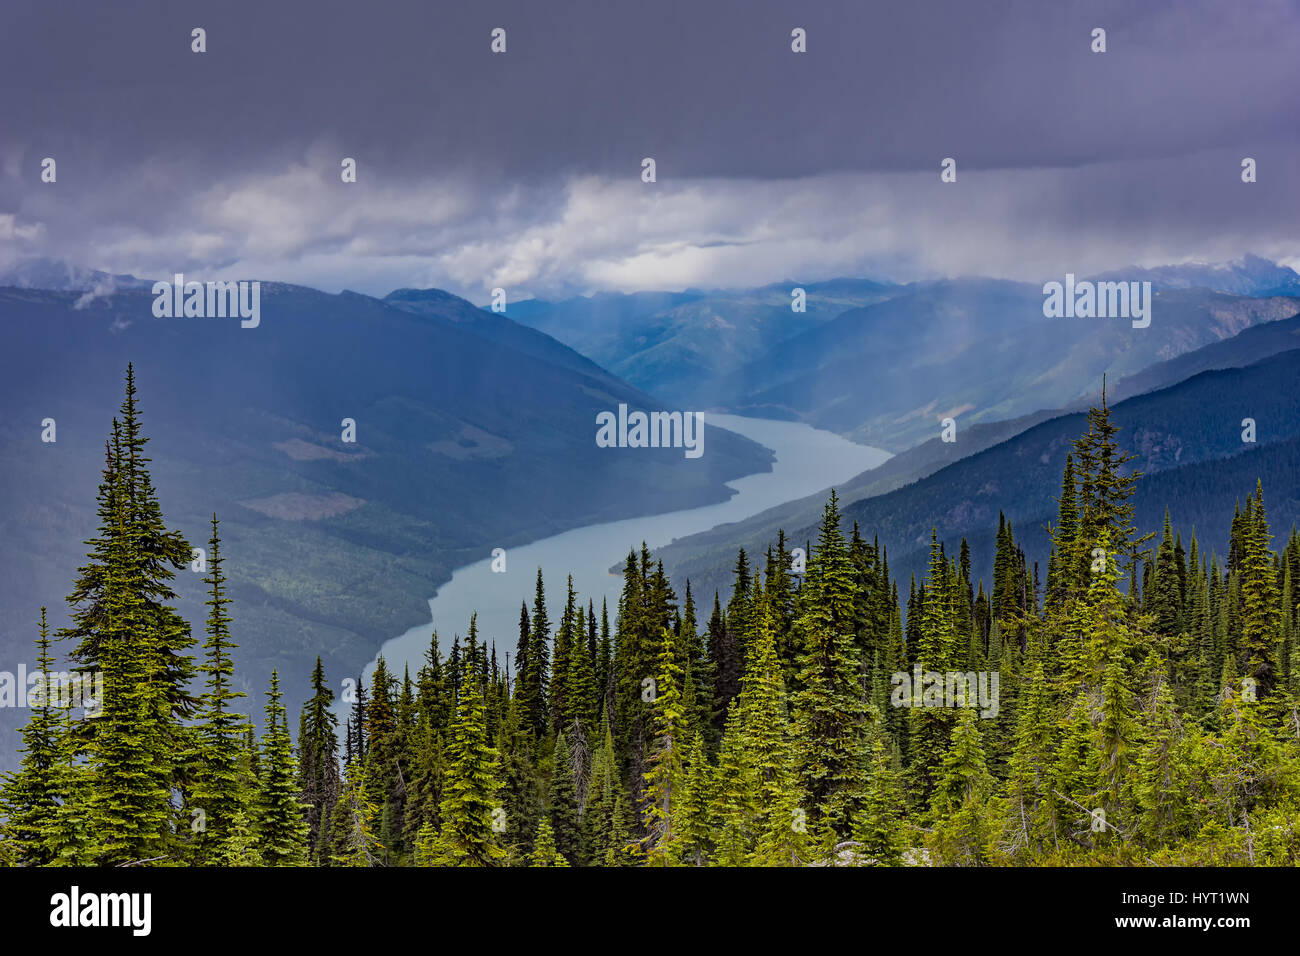 An elevated view of Lake Revelstoke from Mount Revelstoke British Columbia Canada on a stormy day Stock Photo